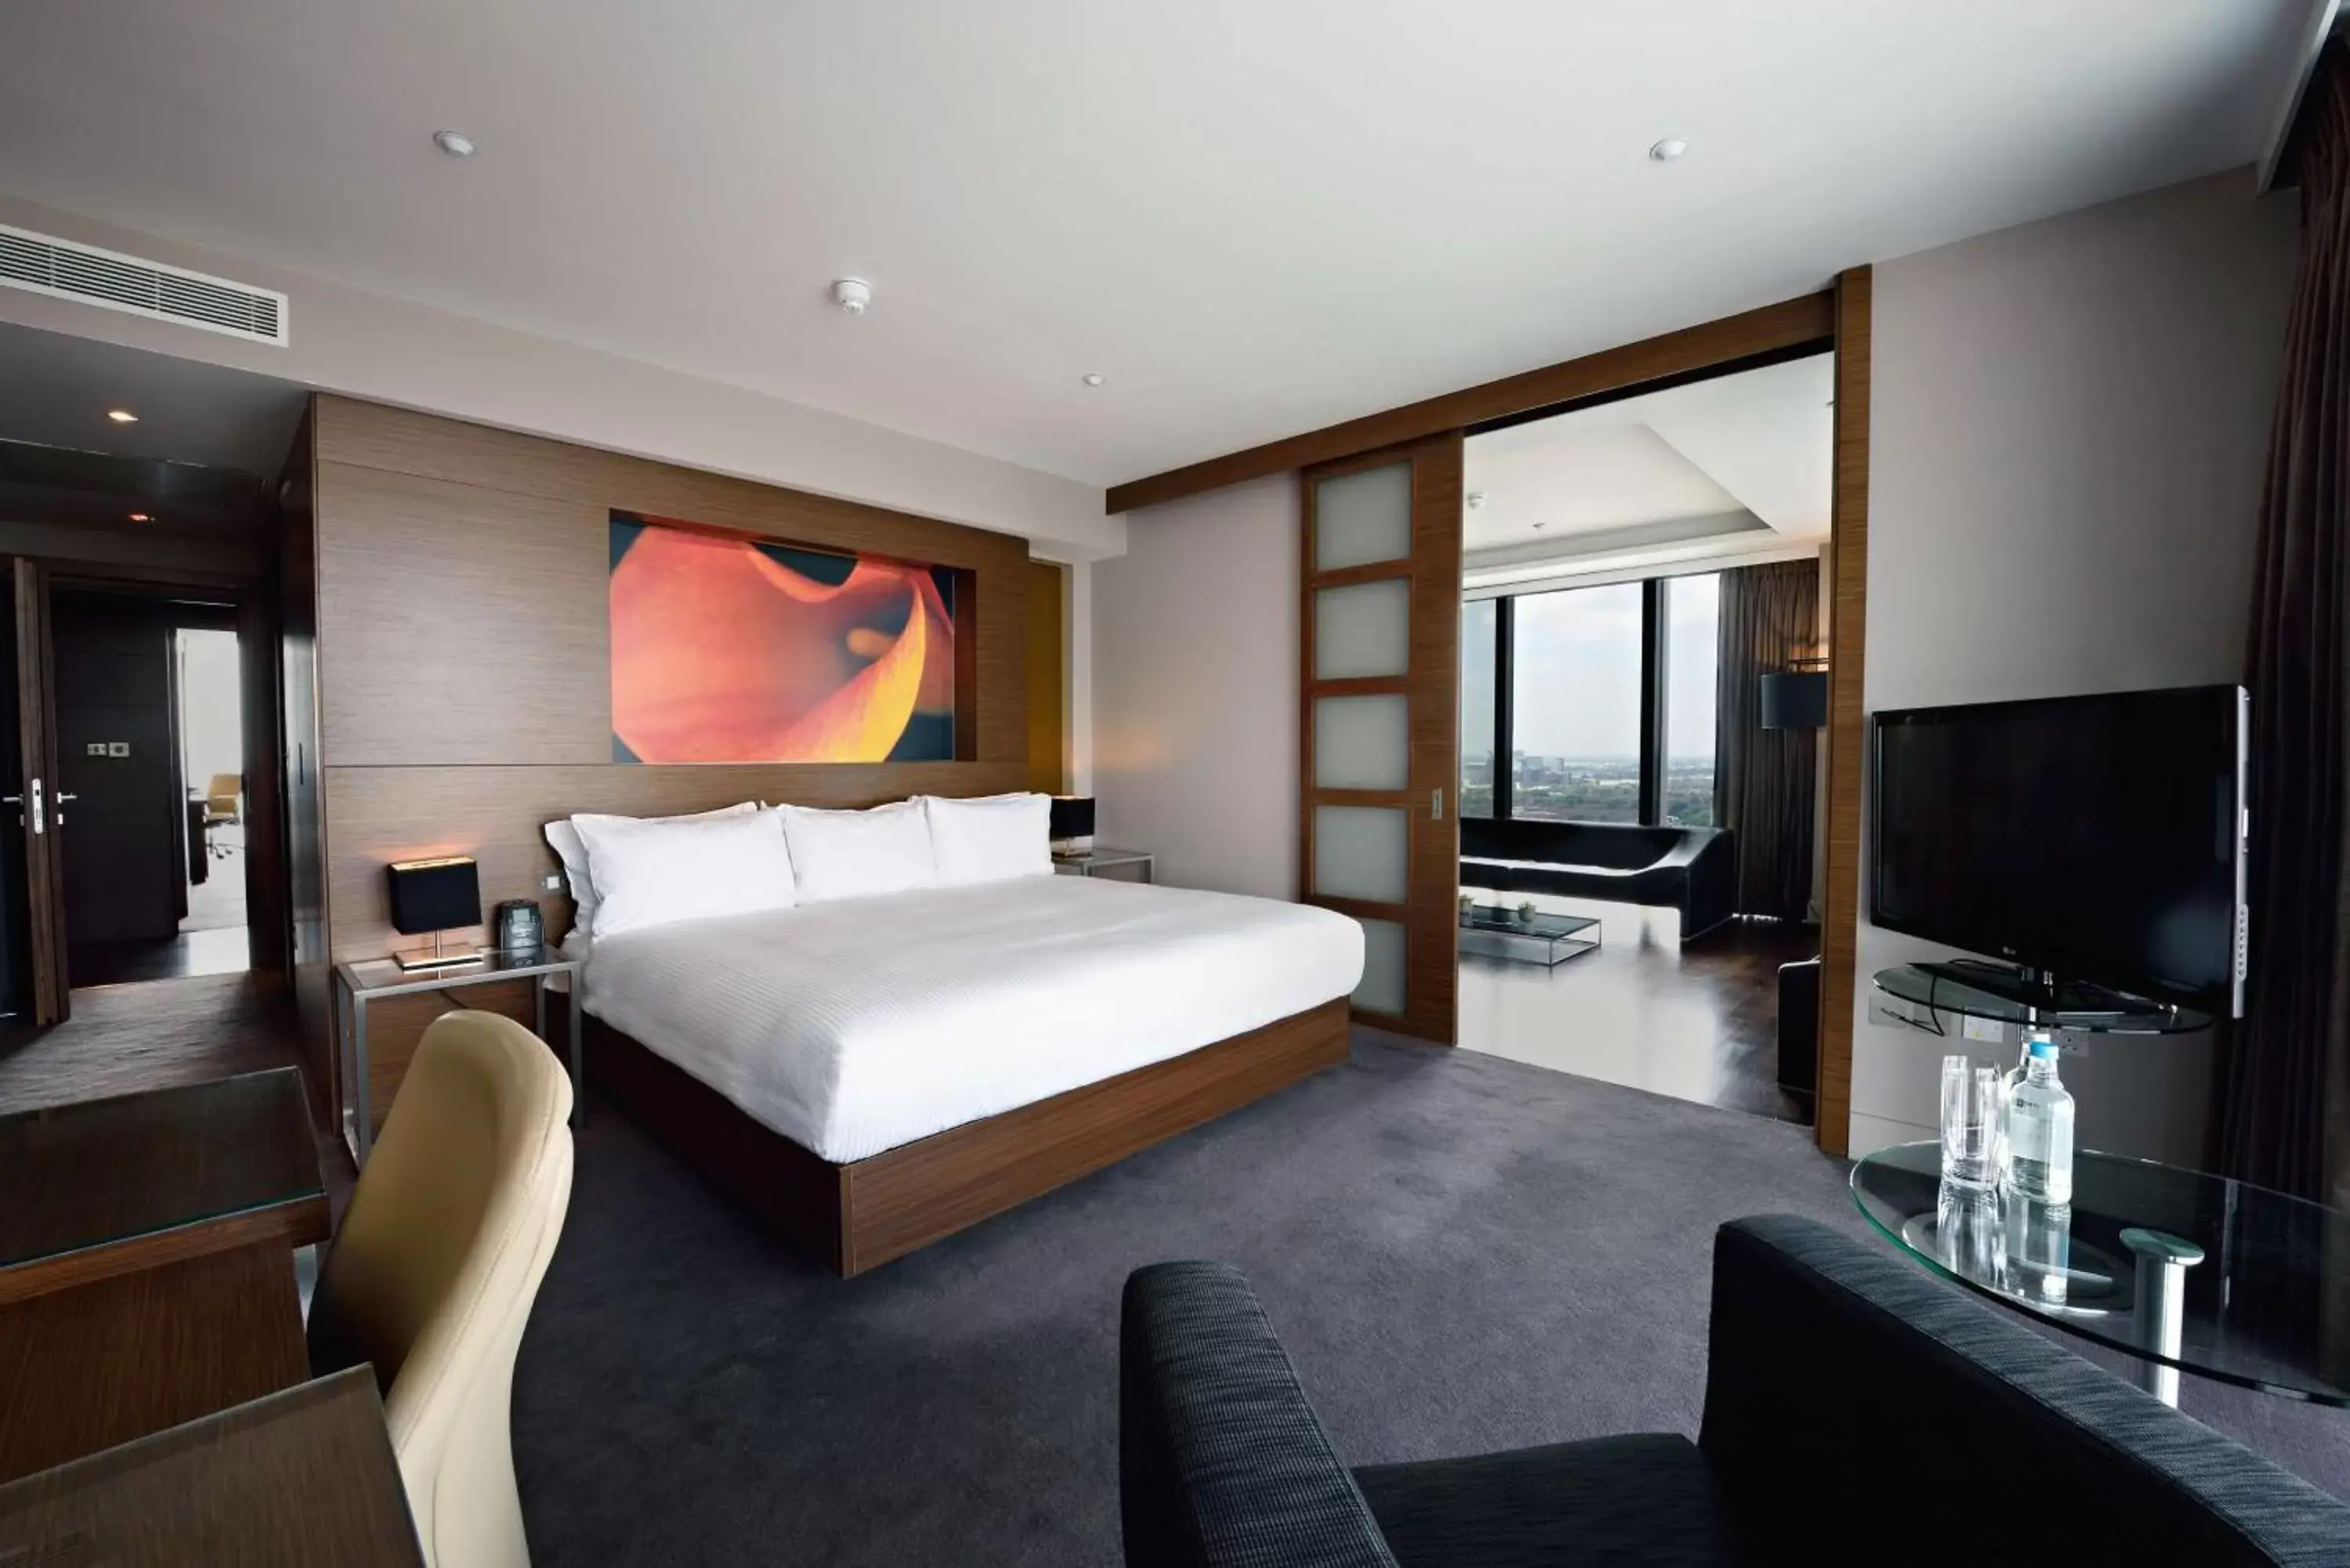 Bedroom in Hilton Manchester Deansgate